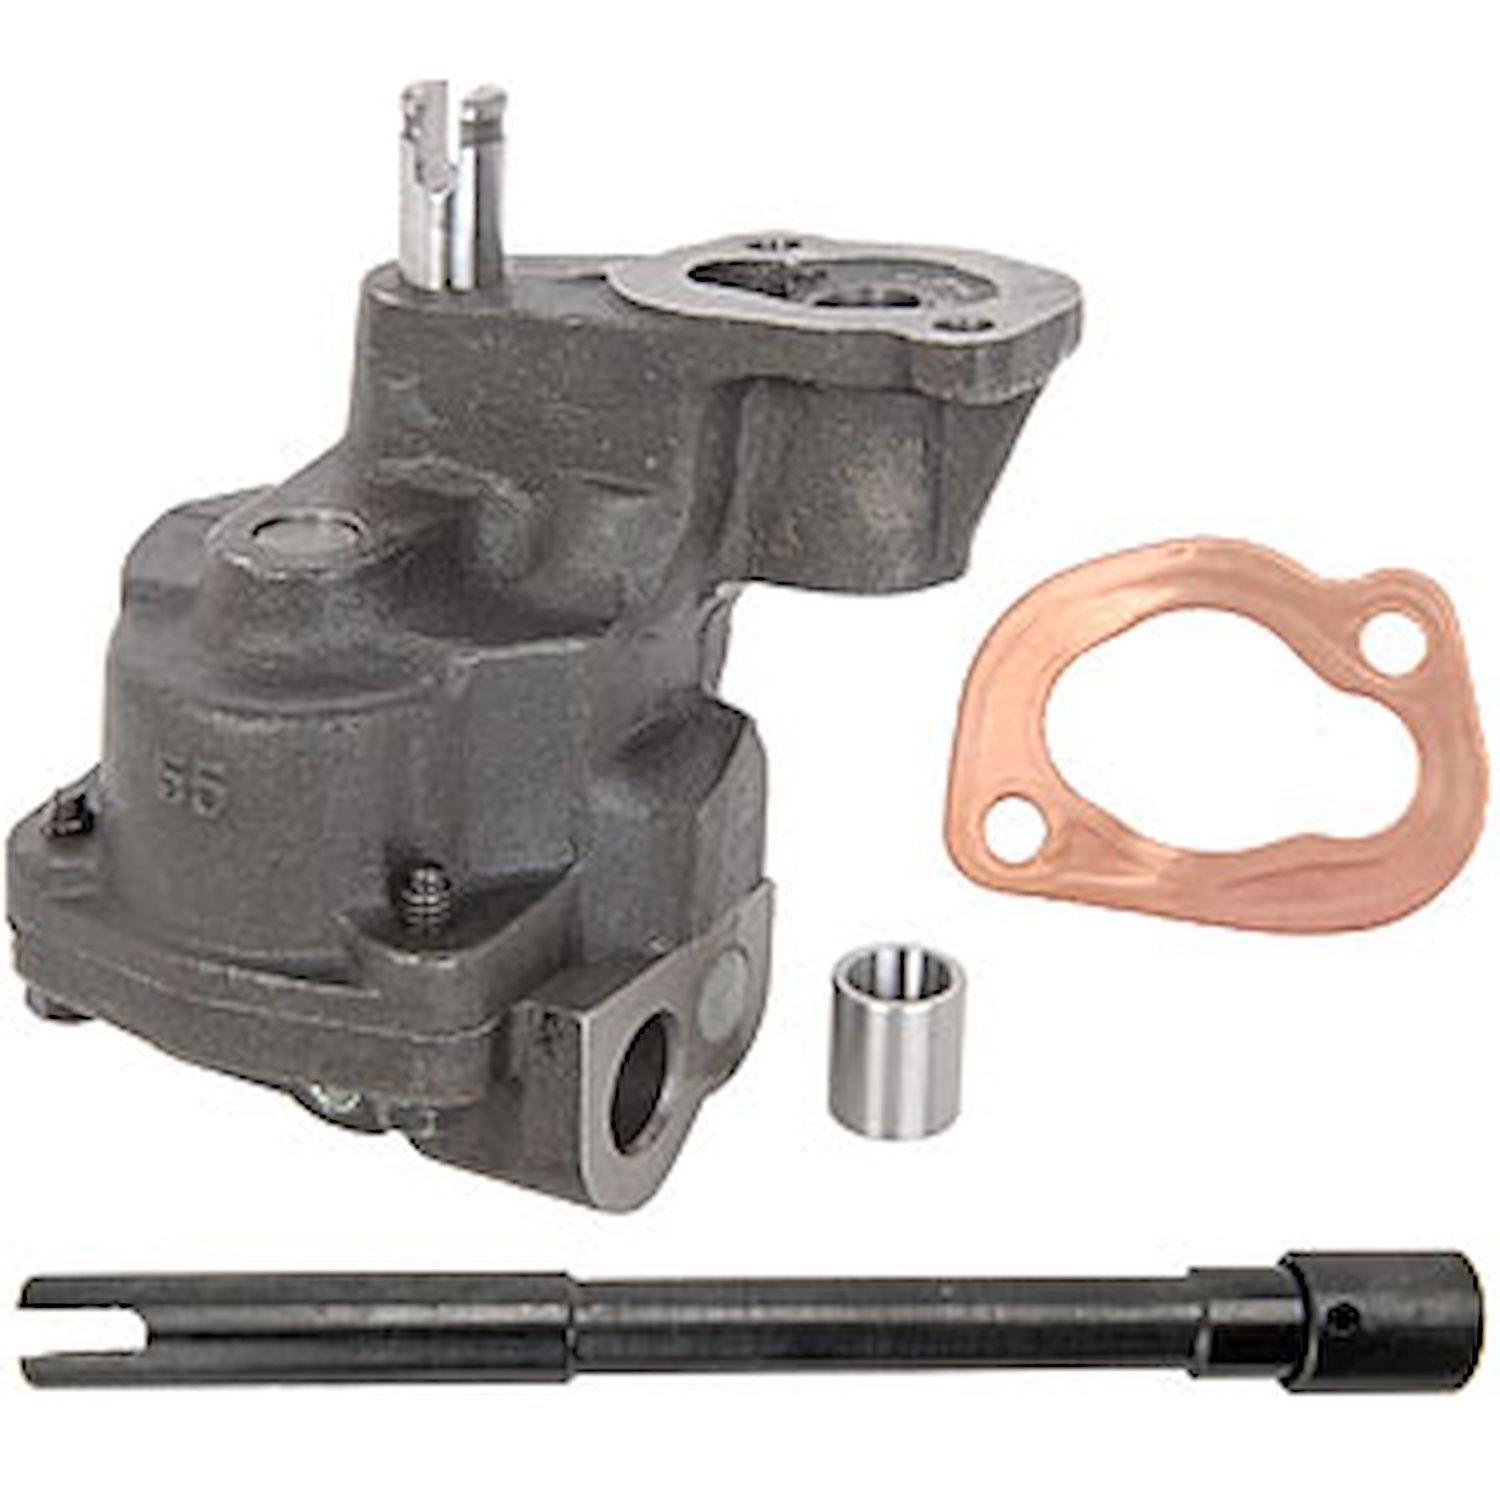 Oil Pump Adjustable for Small Block Chevy Street, Strip, Race Applications